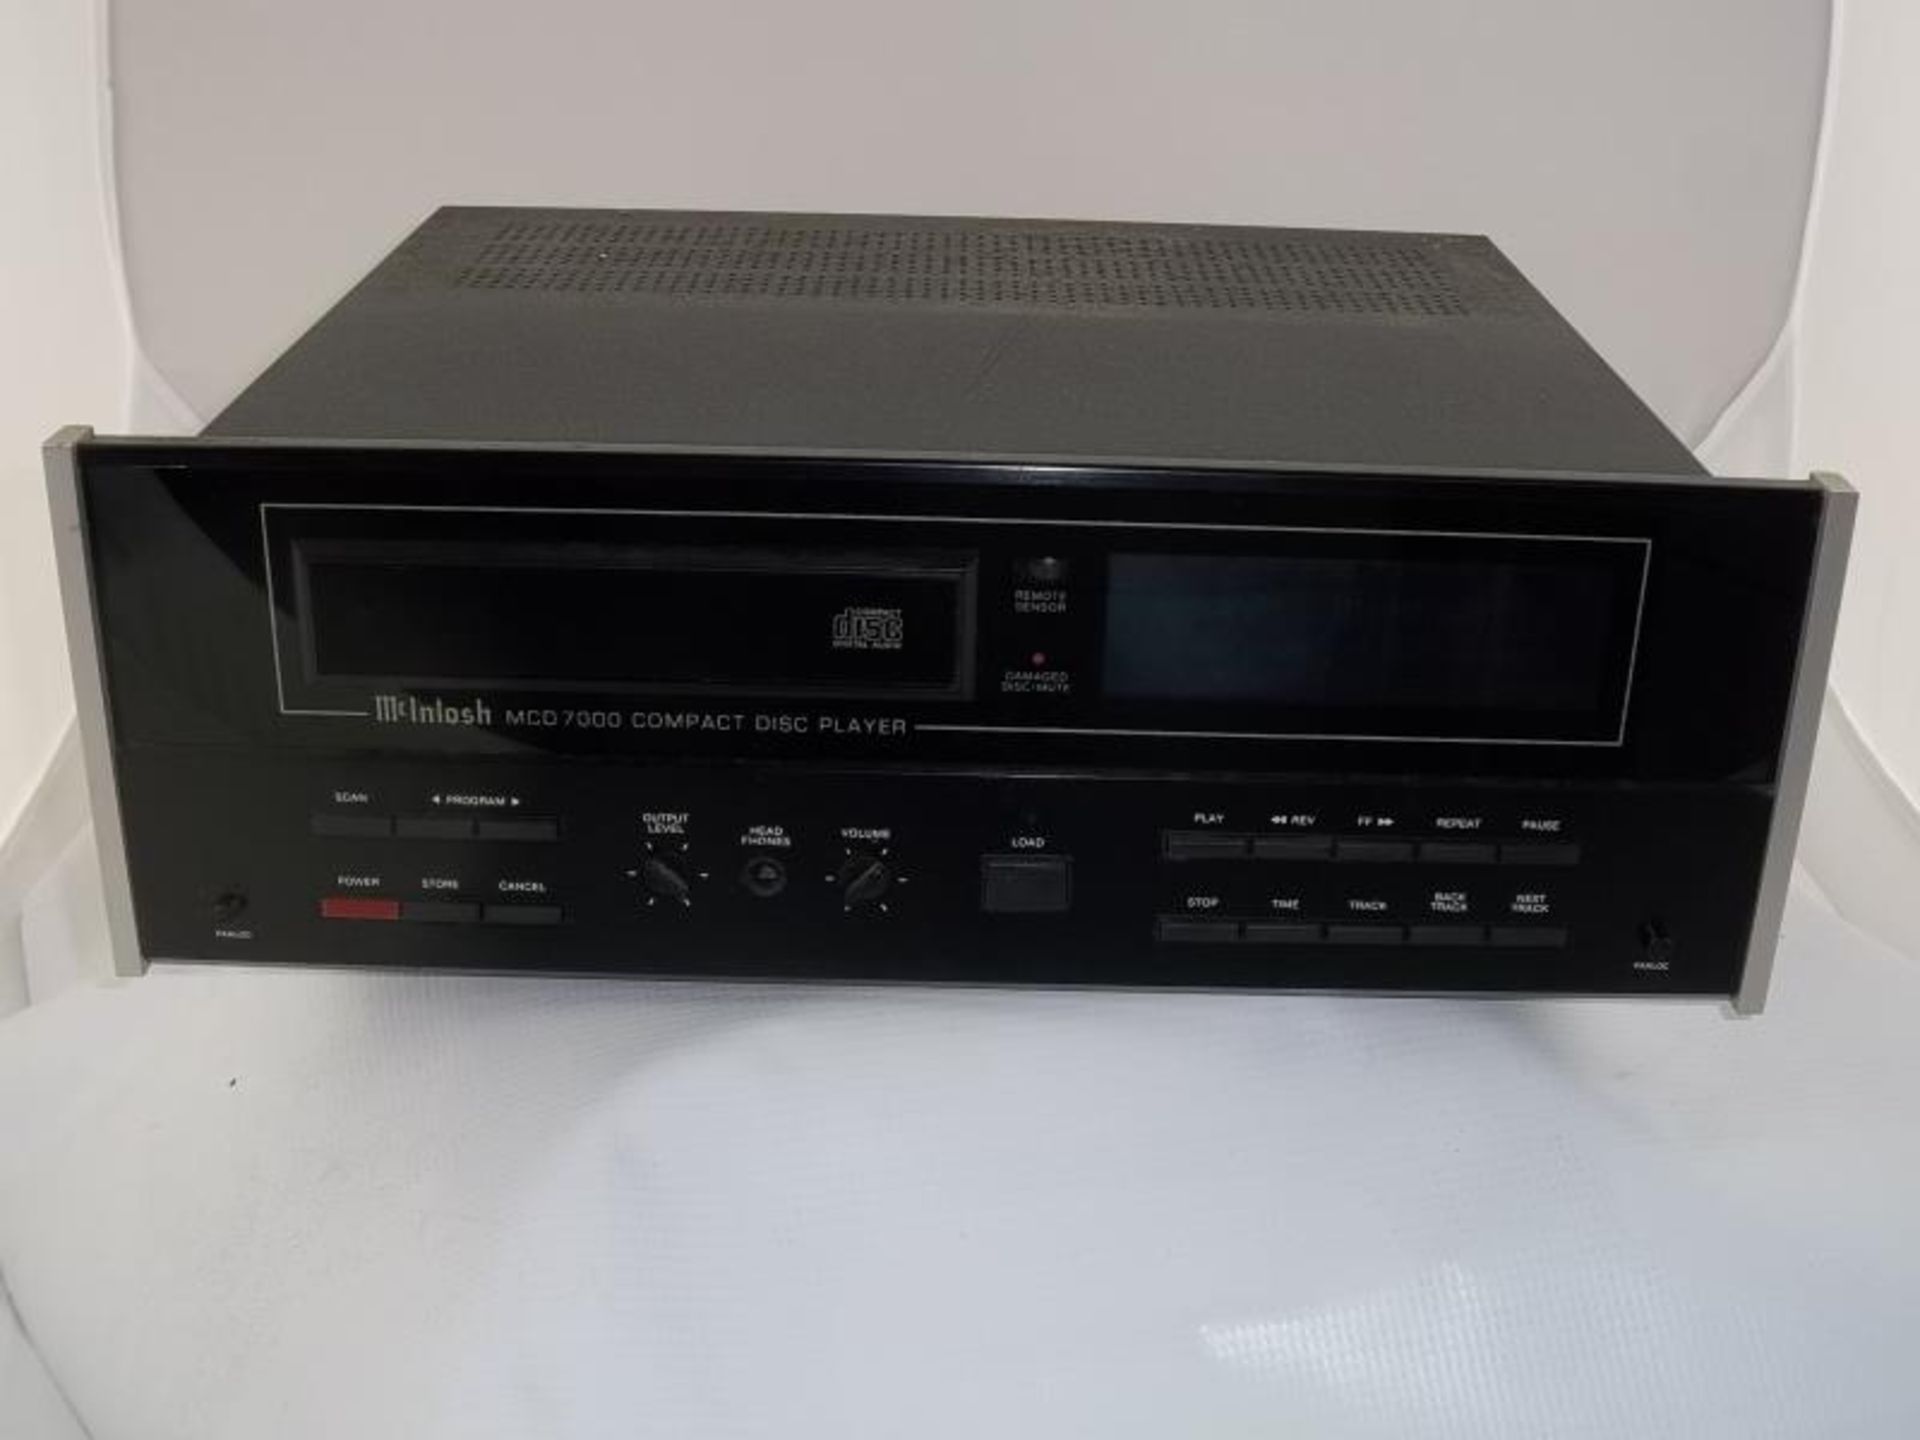 McIntosh MCD 7000, compact disc player, w/case, s # DT4185, tested - powers up